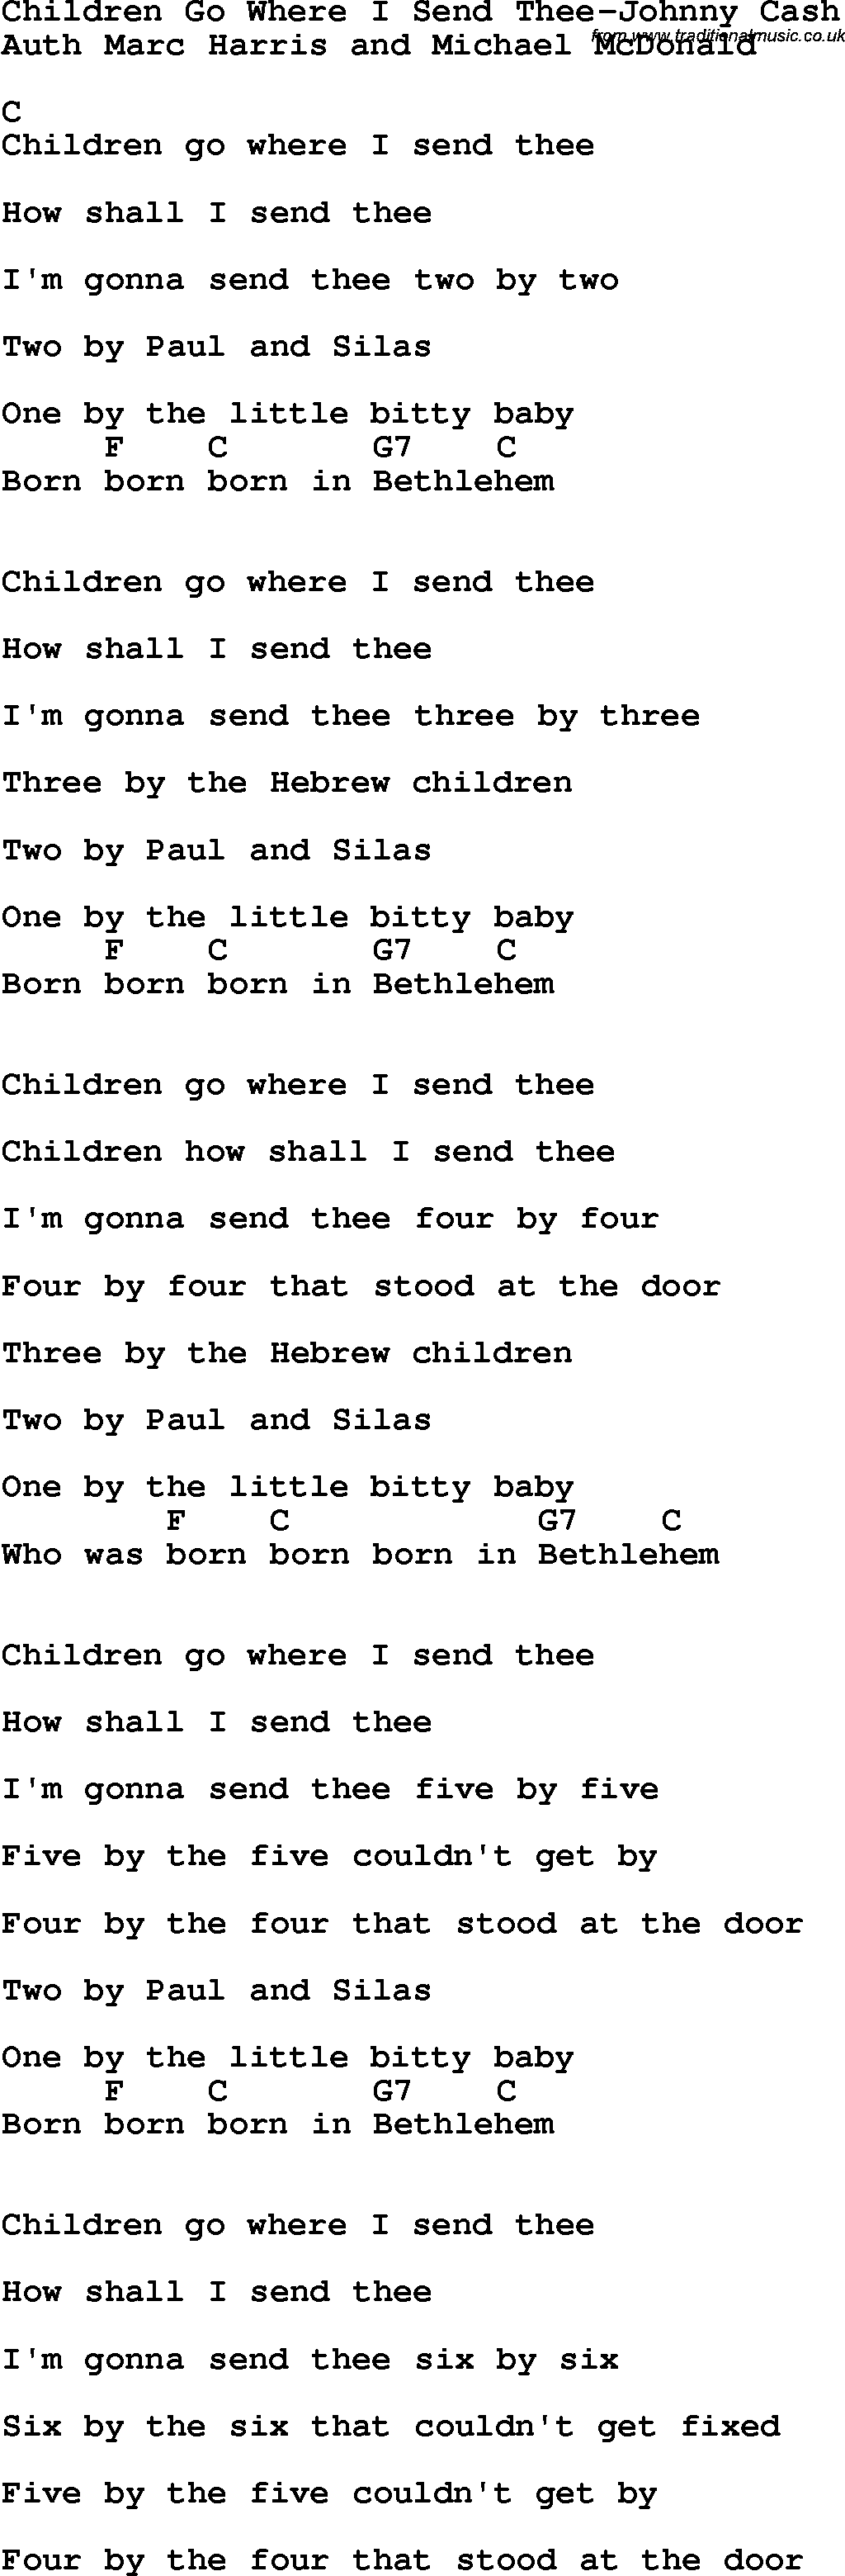 Country, Southern and Bluegrass Gospel Song Children Go Where I Send Thee-Johnny Cash lyrics and chords